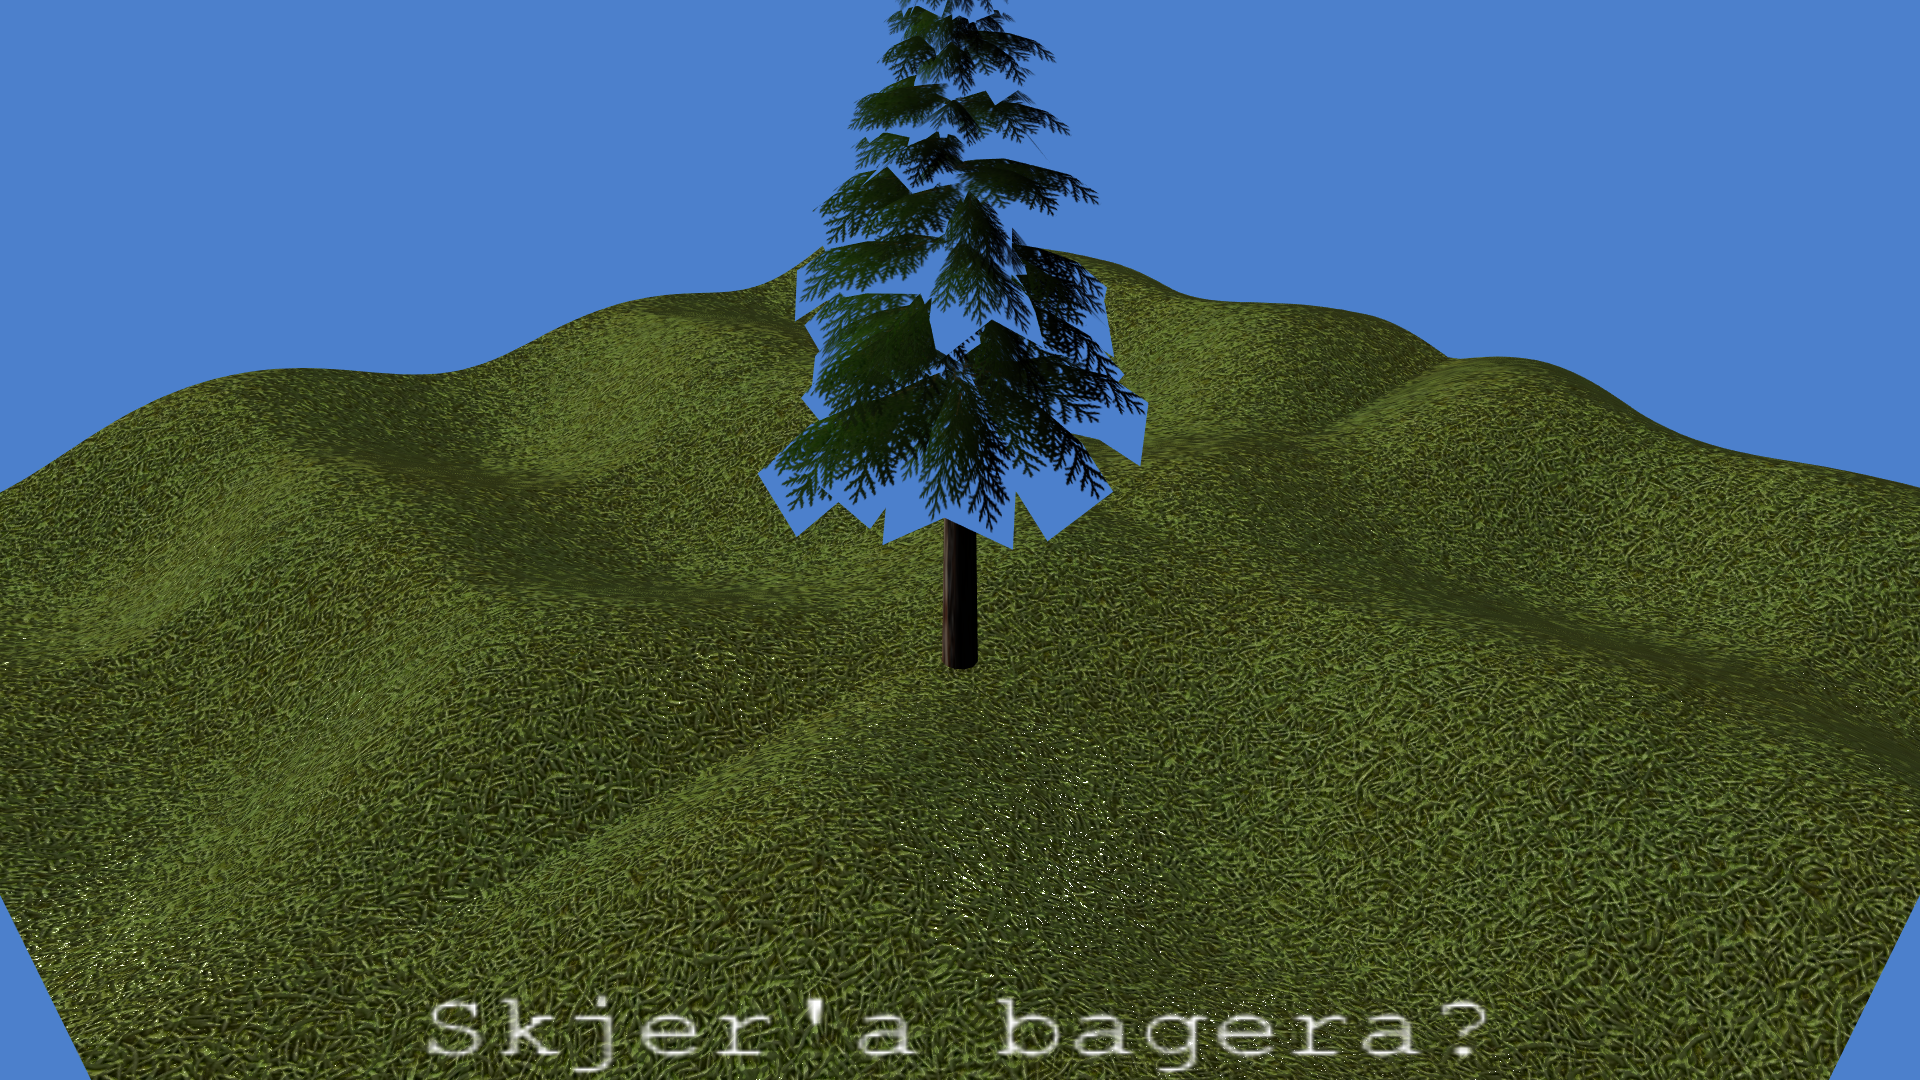 Tree model loaded from model file, textures applied.